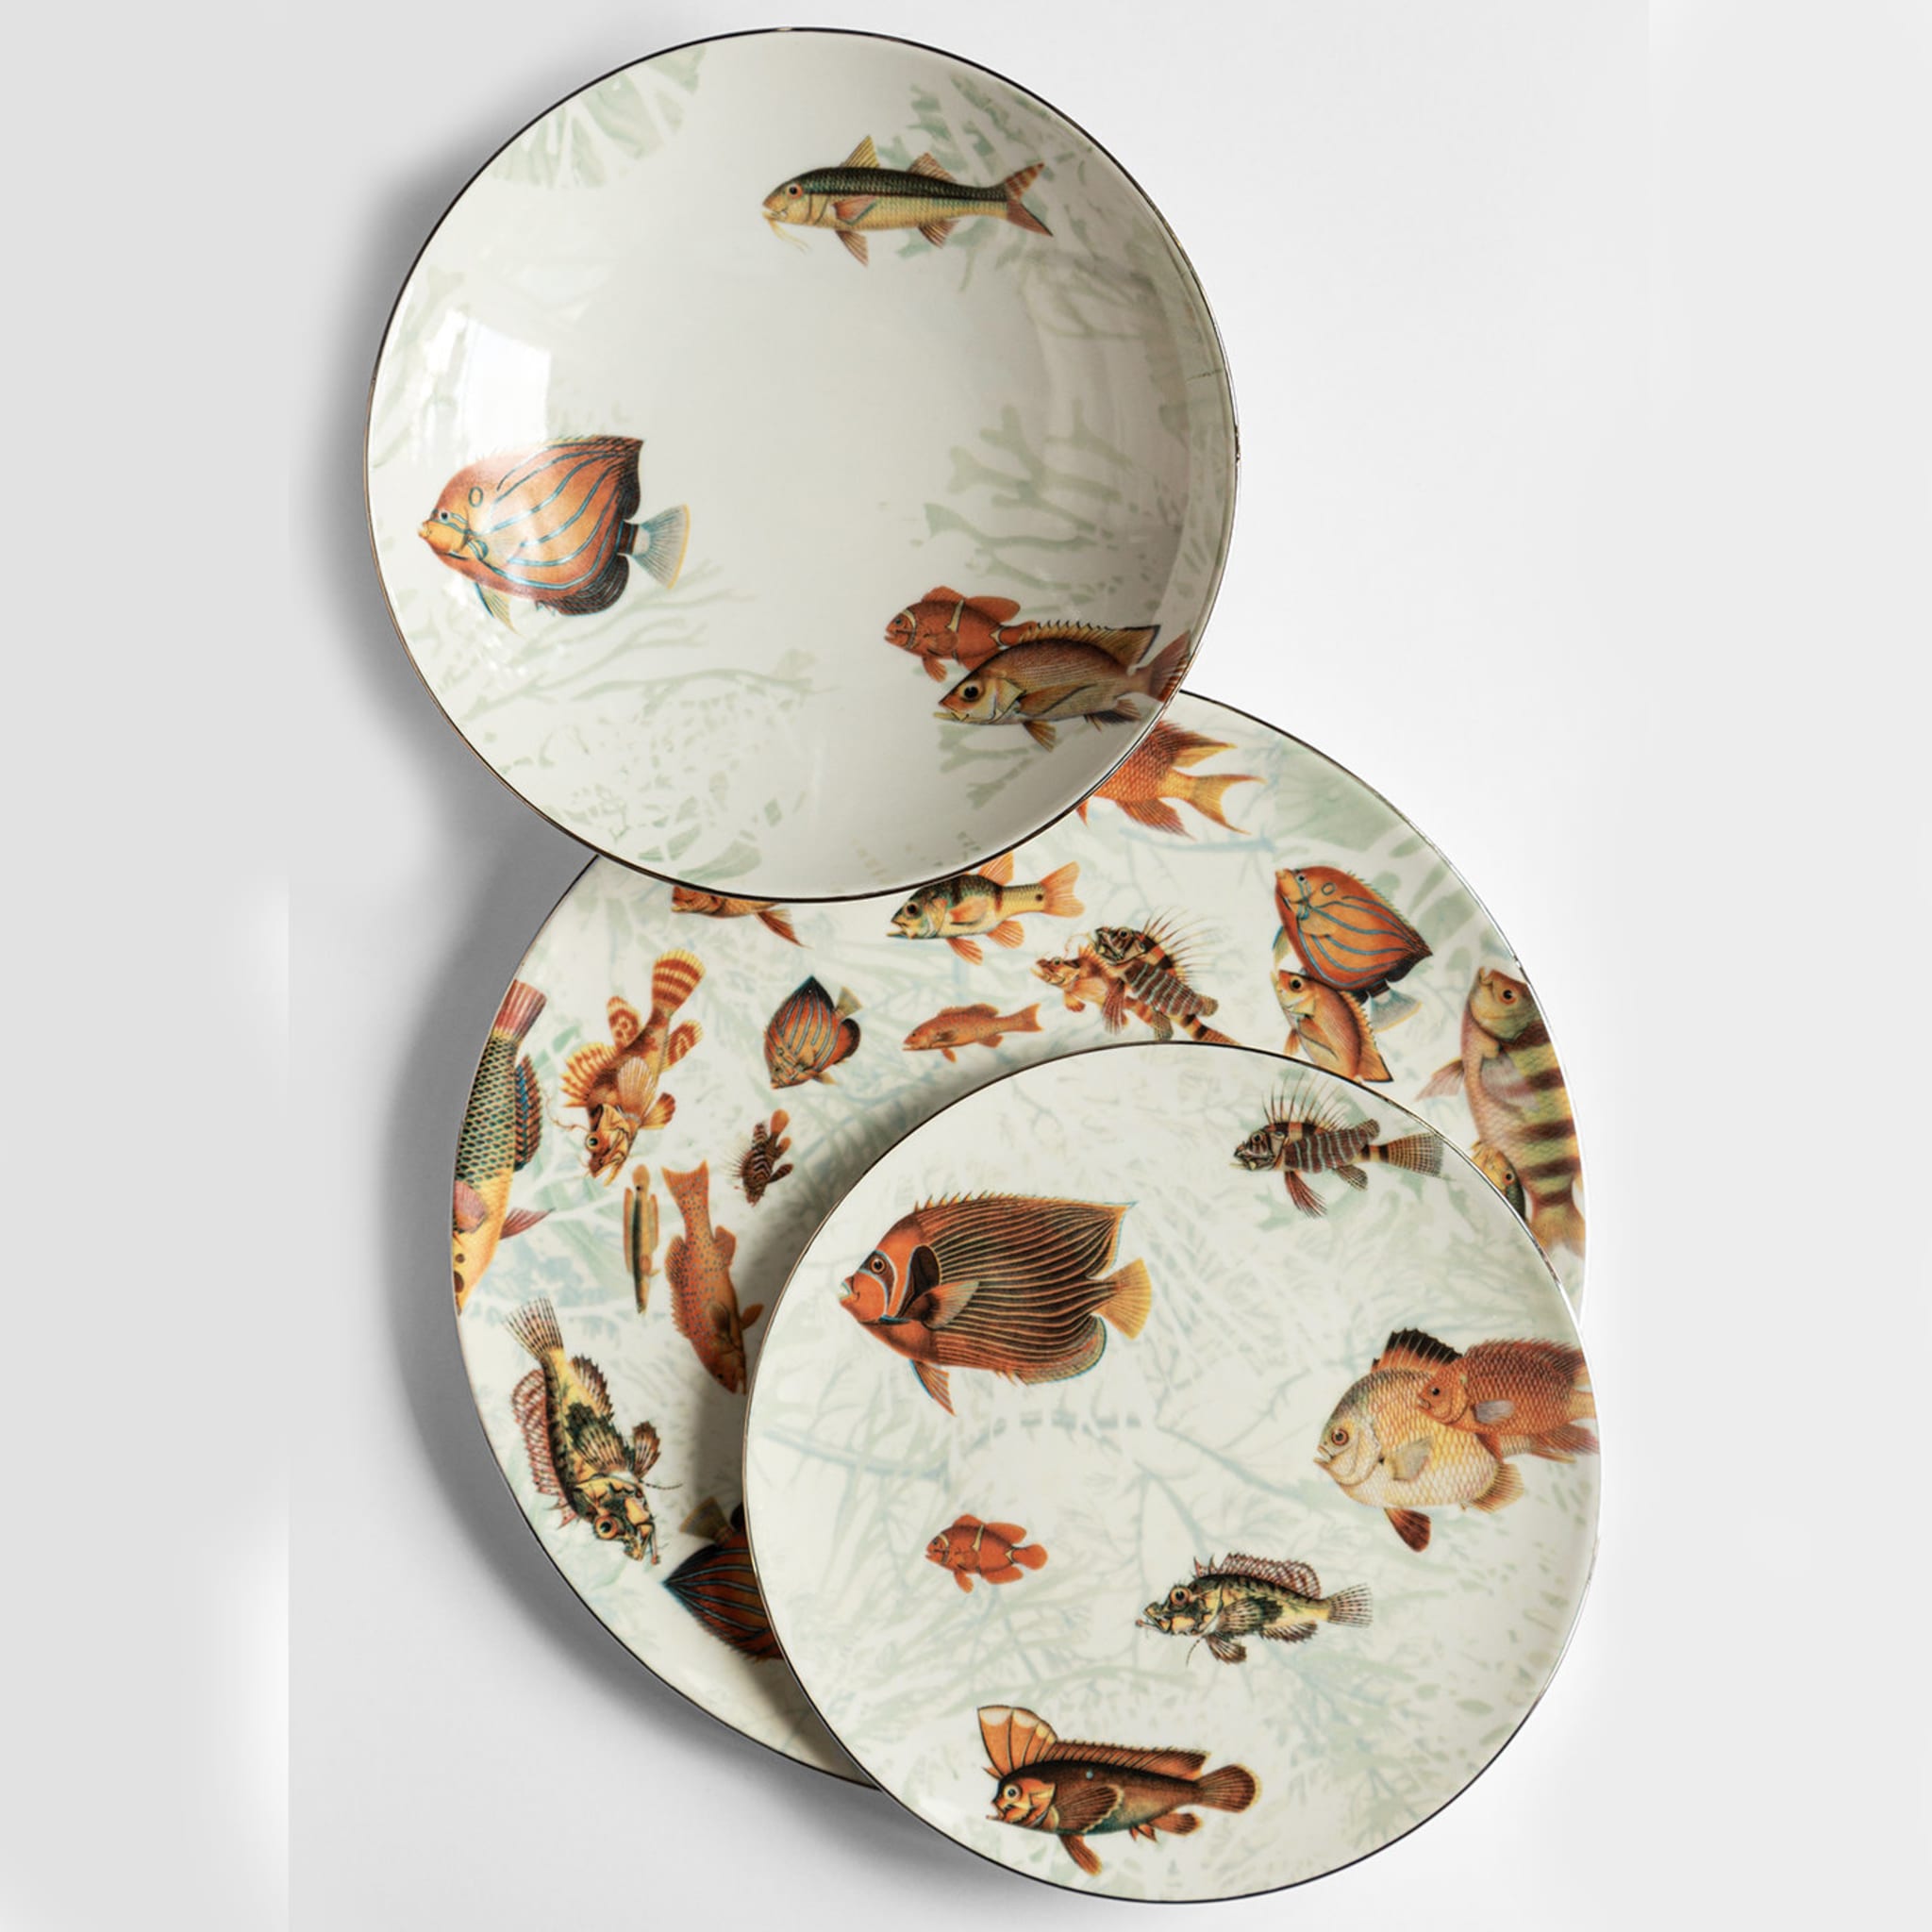 Amami Porcelain Soup Plate With Tropical Fish #6 - Alternative view 1